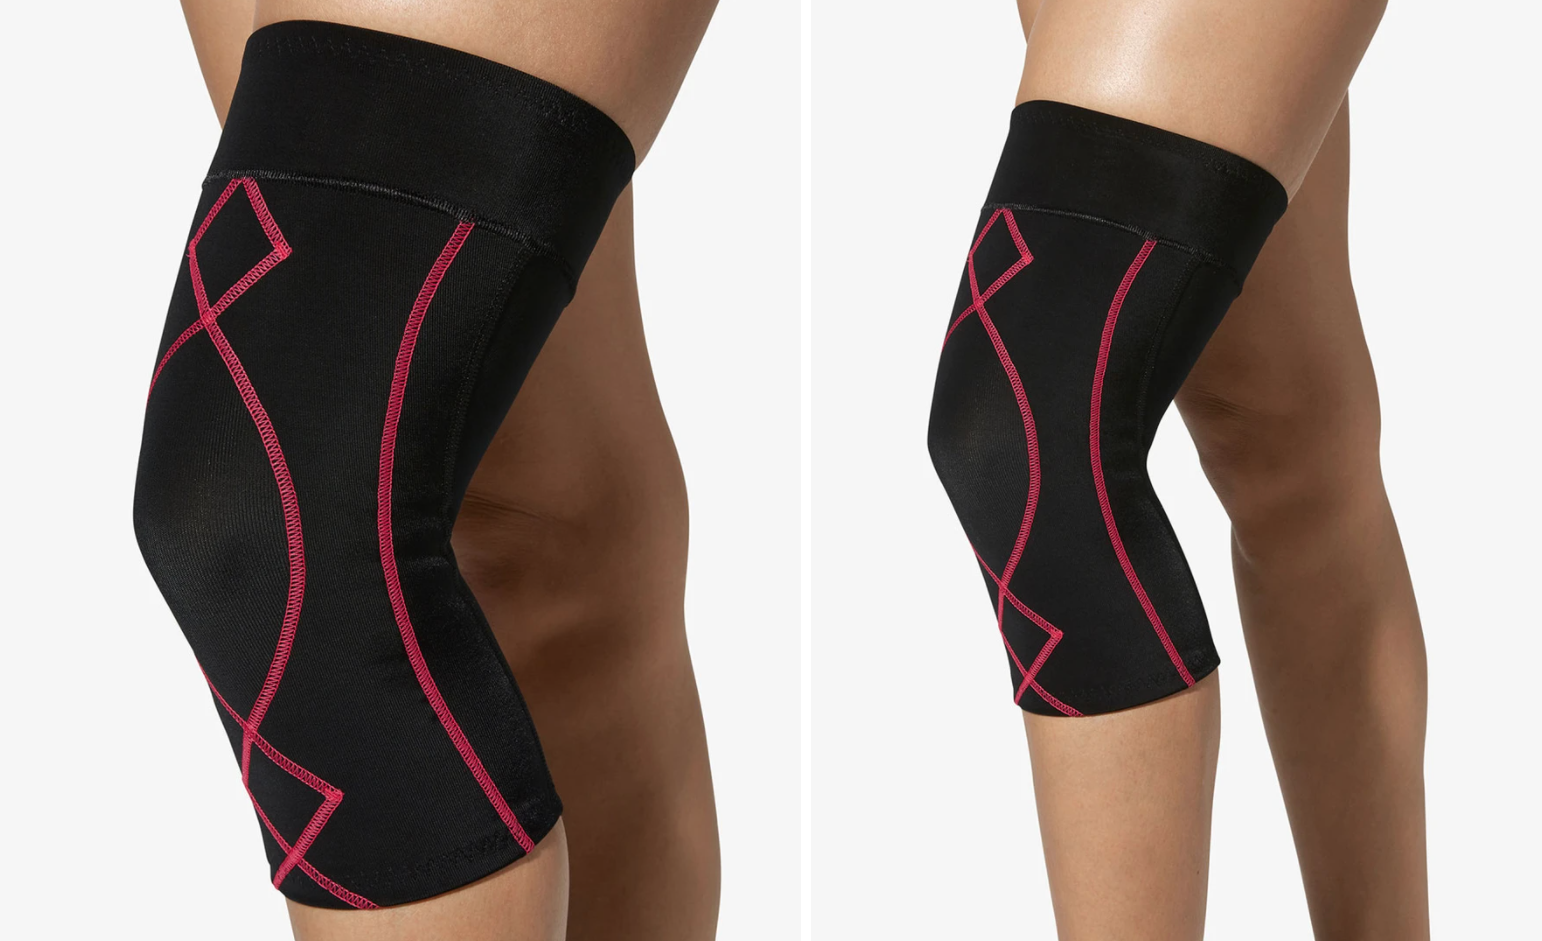 cw-x compression, knee sleeve, runners, running